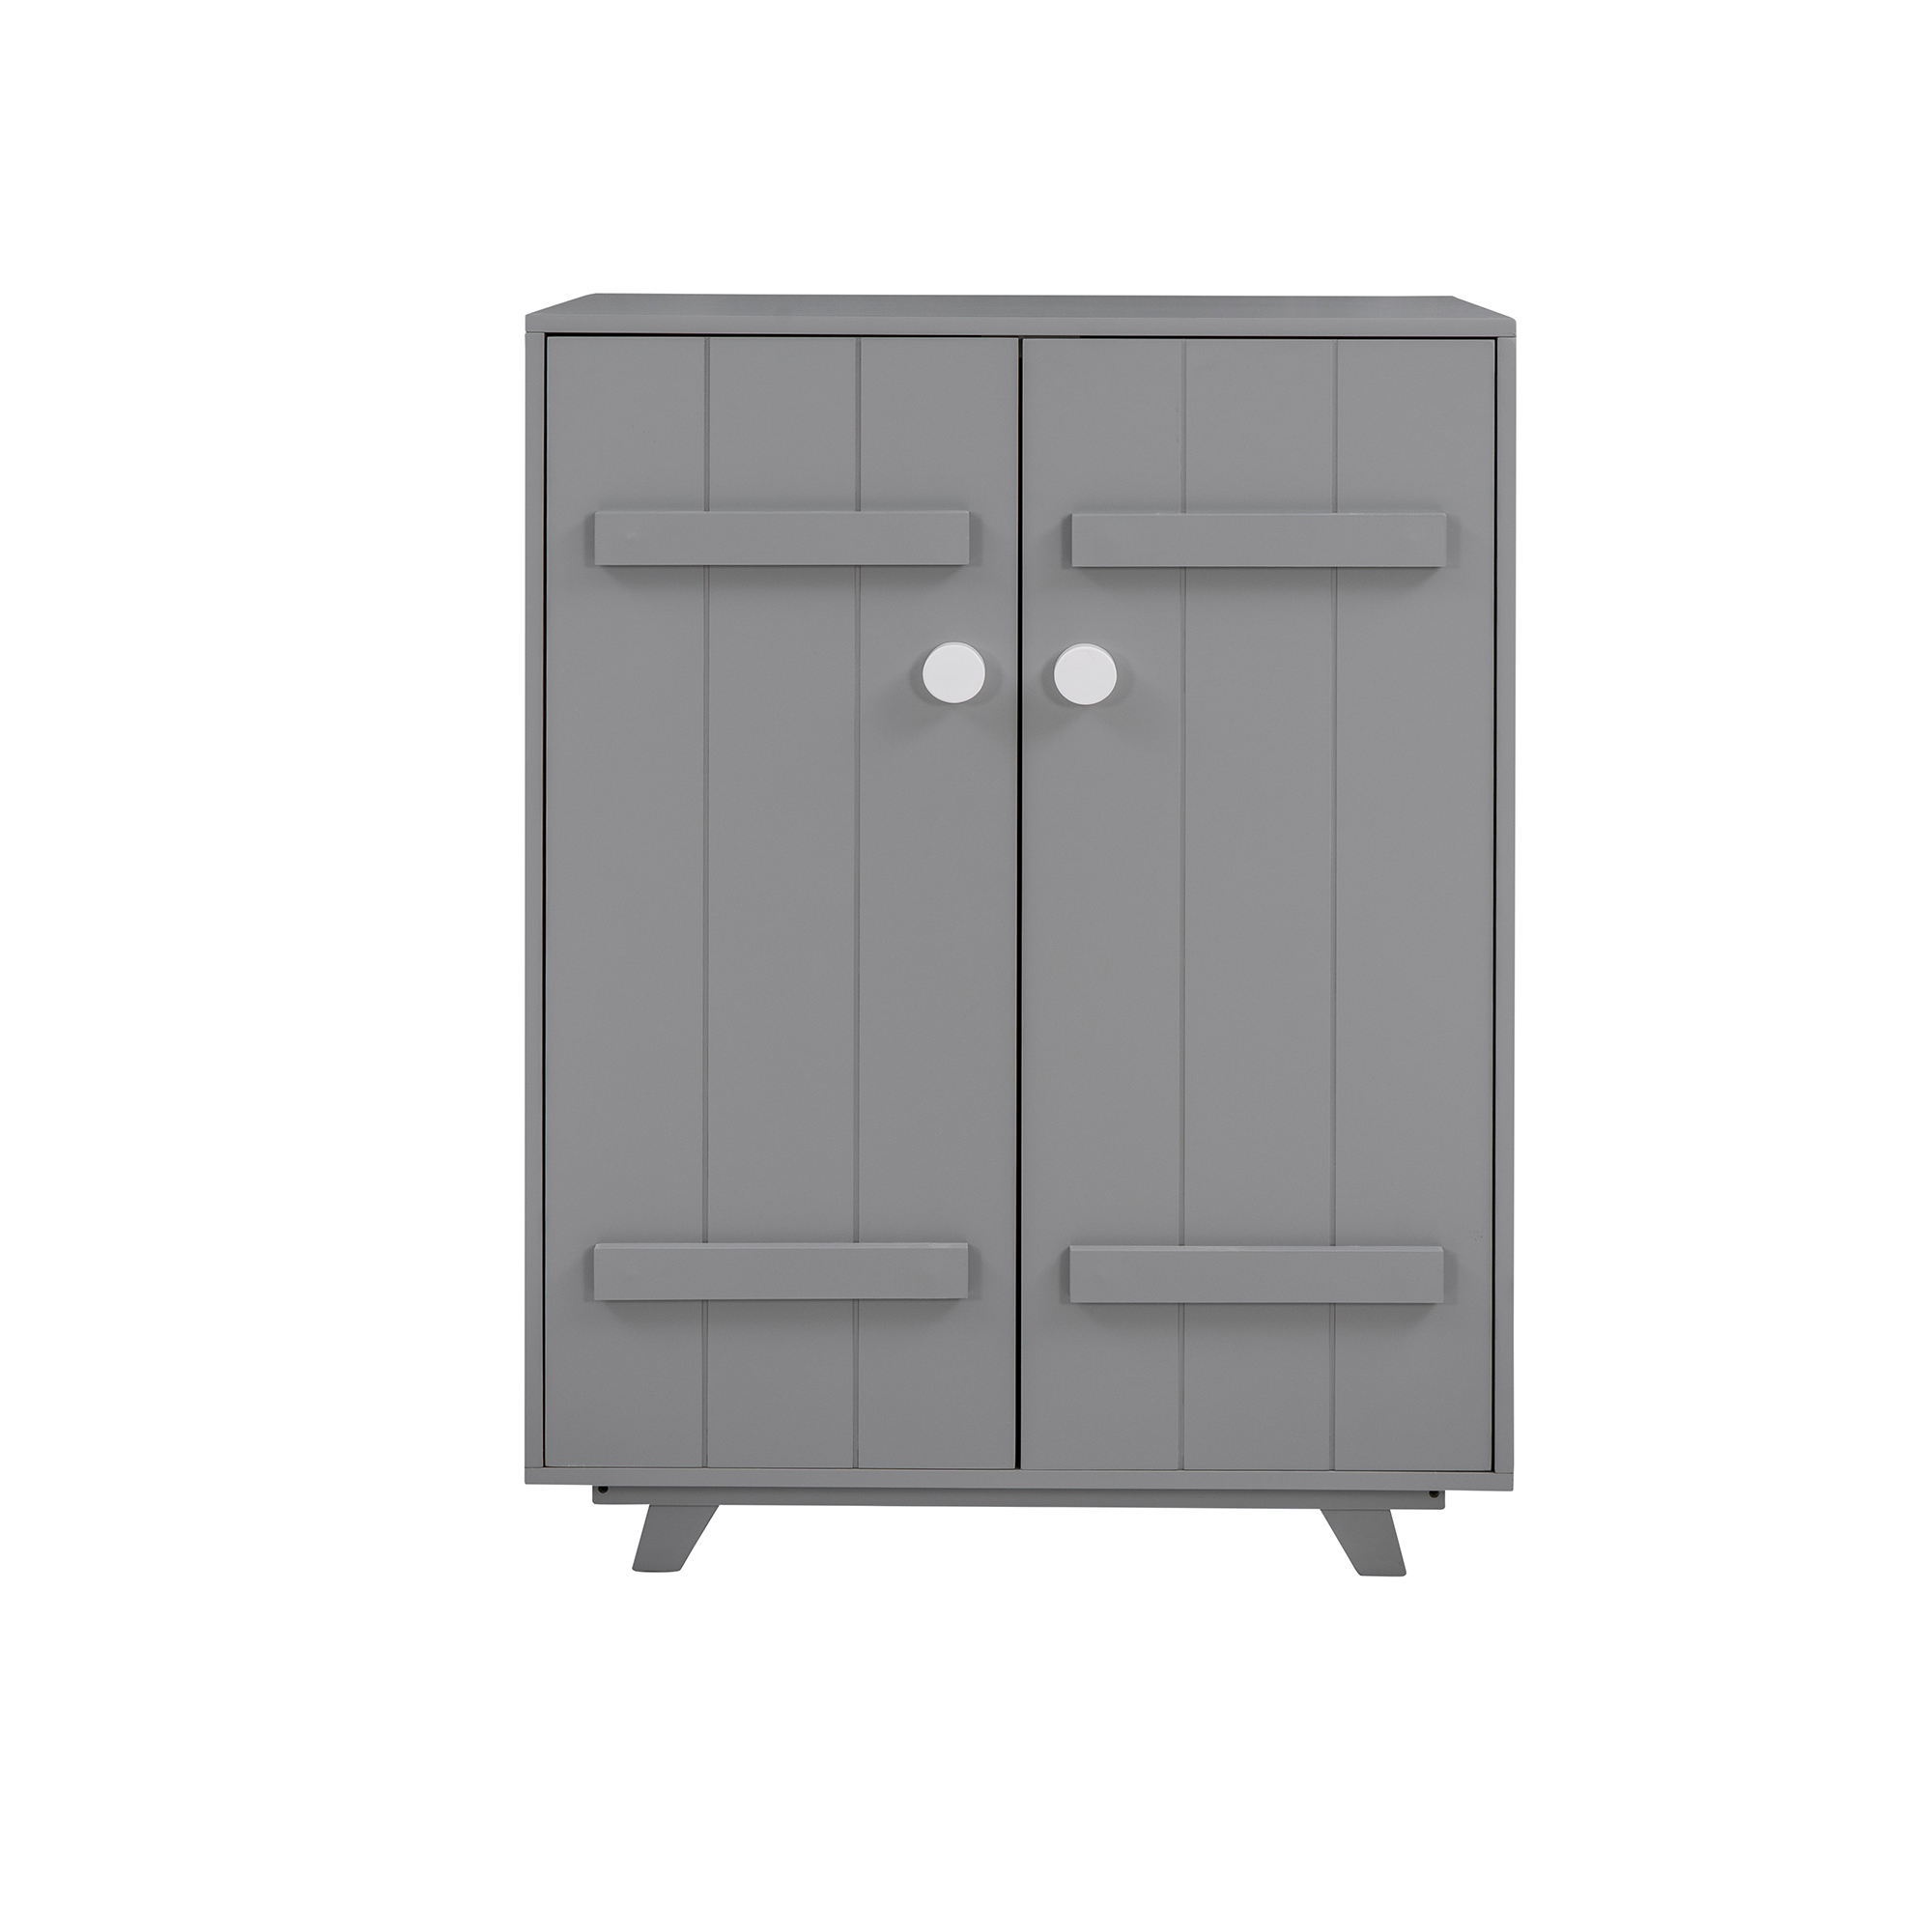 Wooden Wardrobe Cabinet With Hanging Rod - WF295689AAE